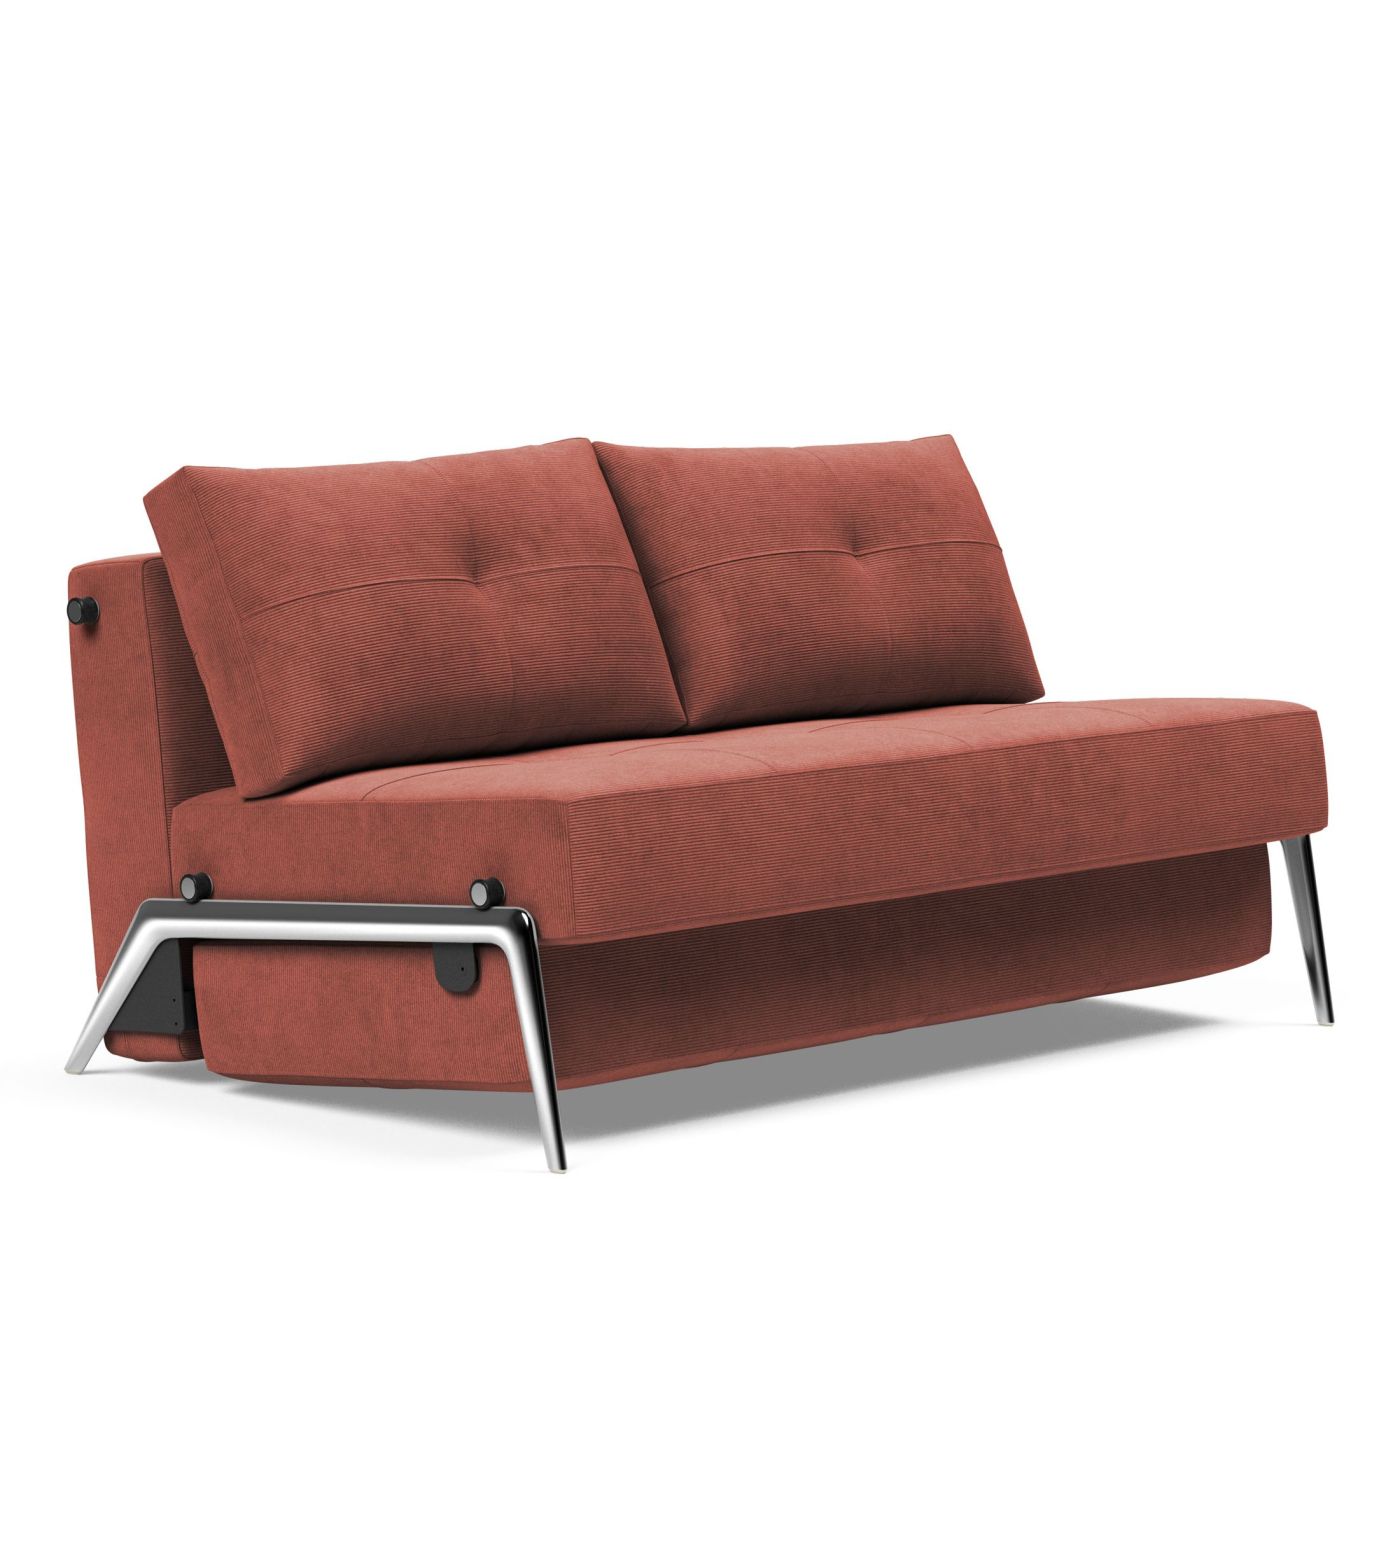 ansvar lindring Svag Cubed 02 Queen Size Sofa Bed with Aluminum Legs by Innovation Living |  Modern Sofa Beds | Cressina